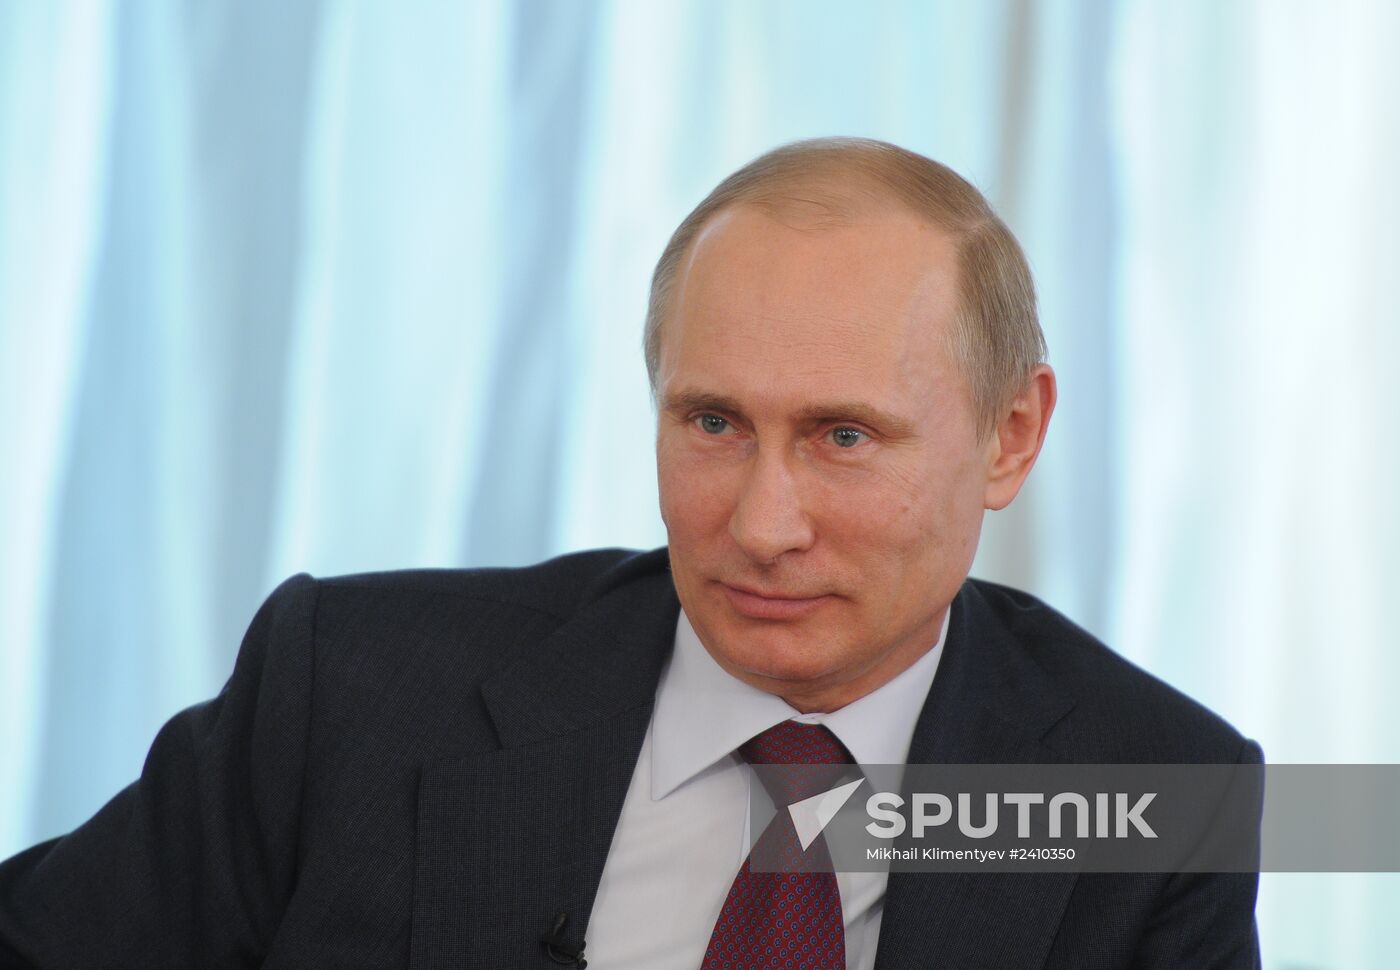 Vladimir Putin meets with All-Russia People's Front activists